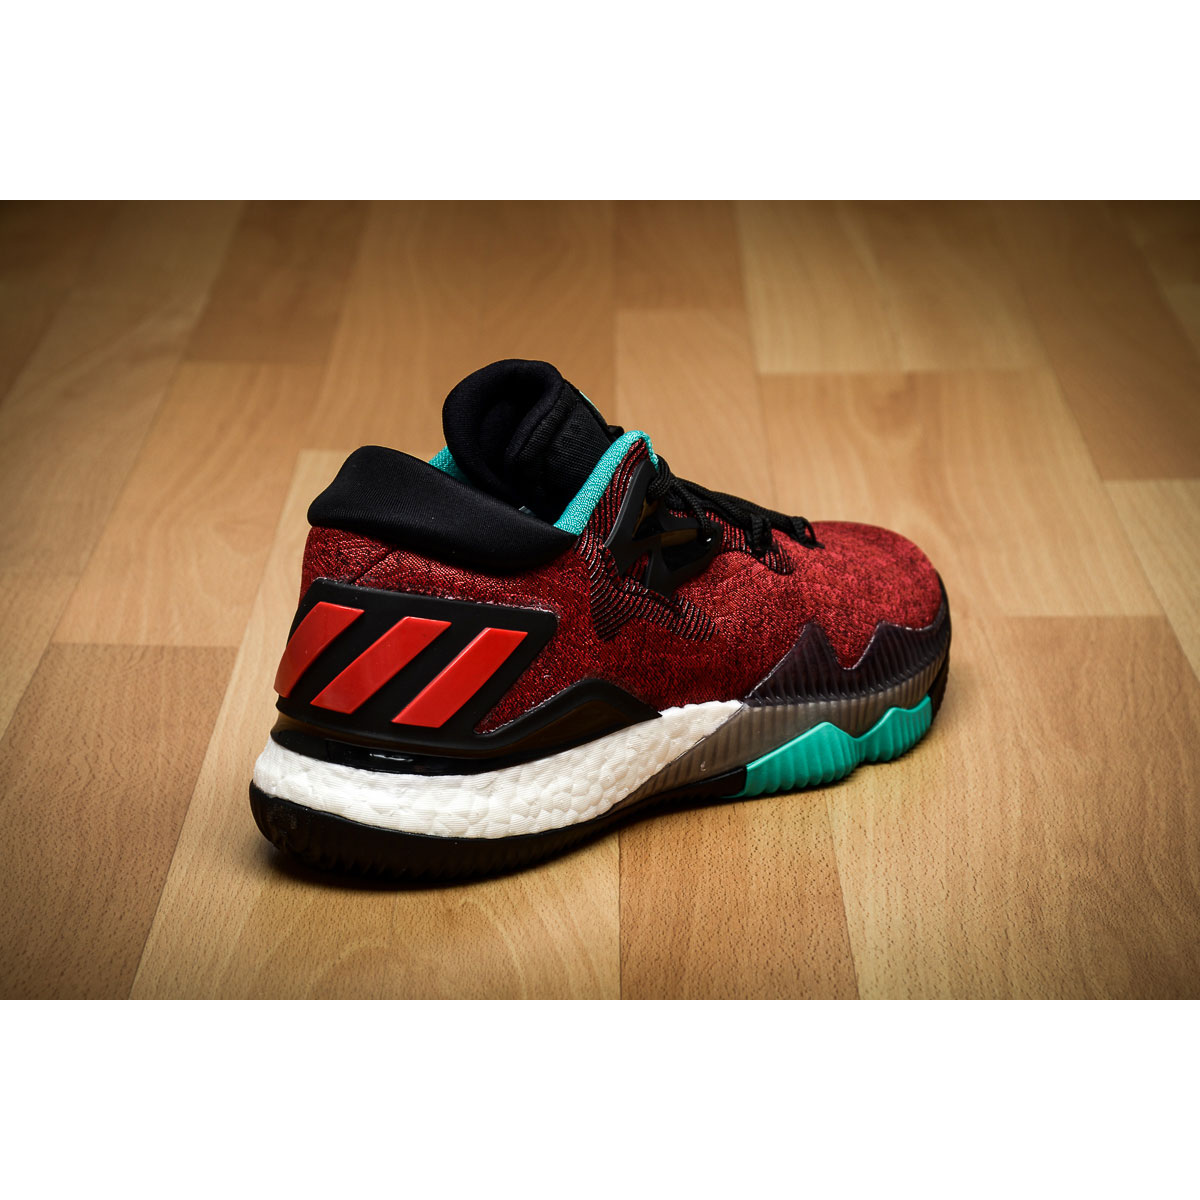 adidas Crazylight Boost Low 2016 red  AQ7761